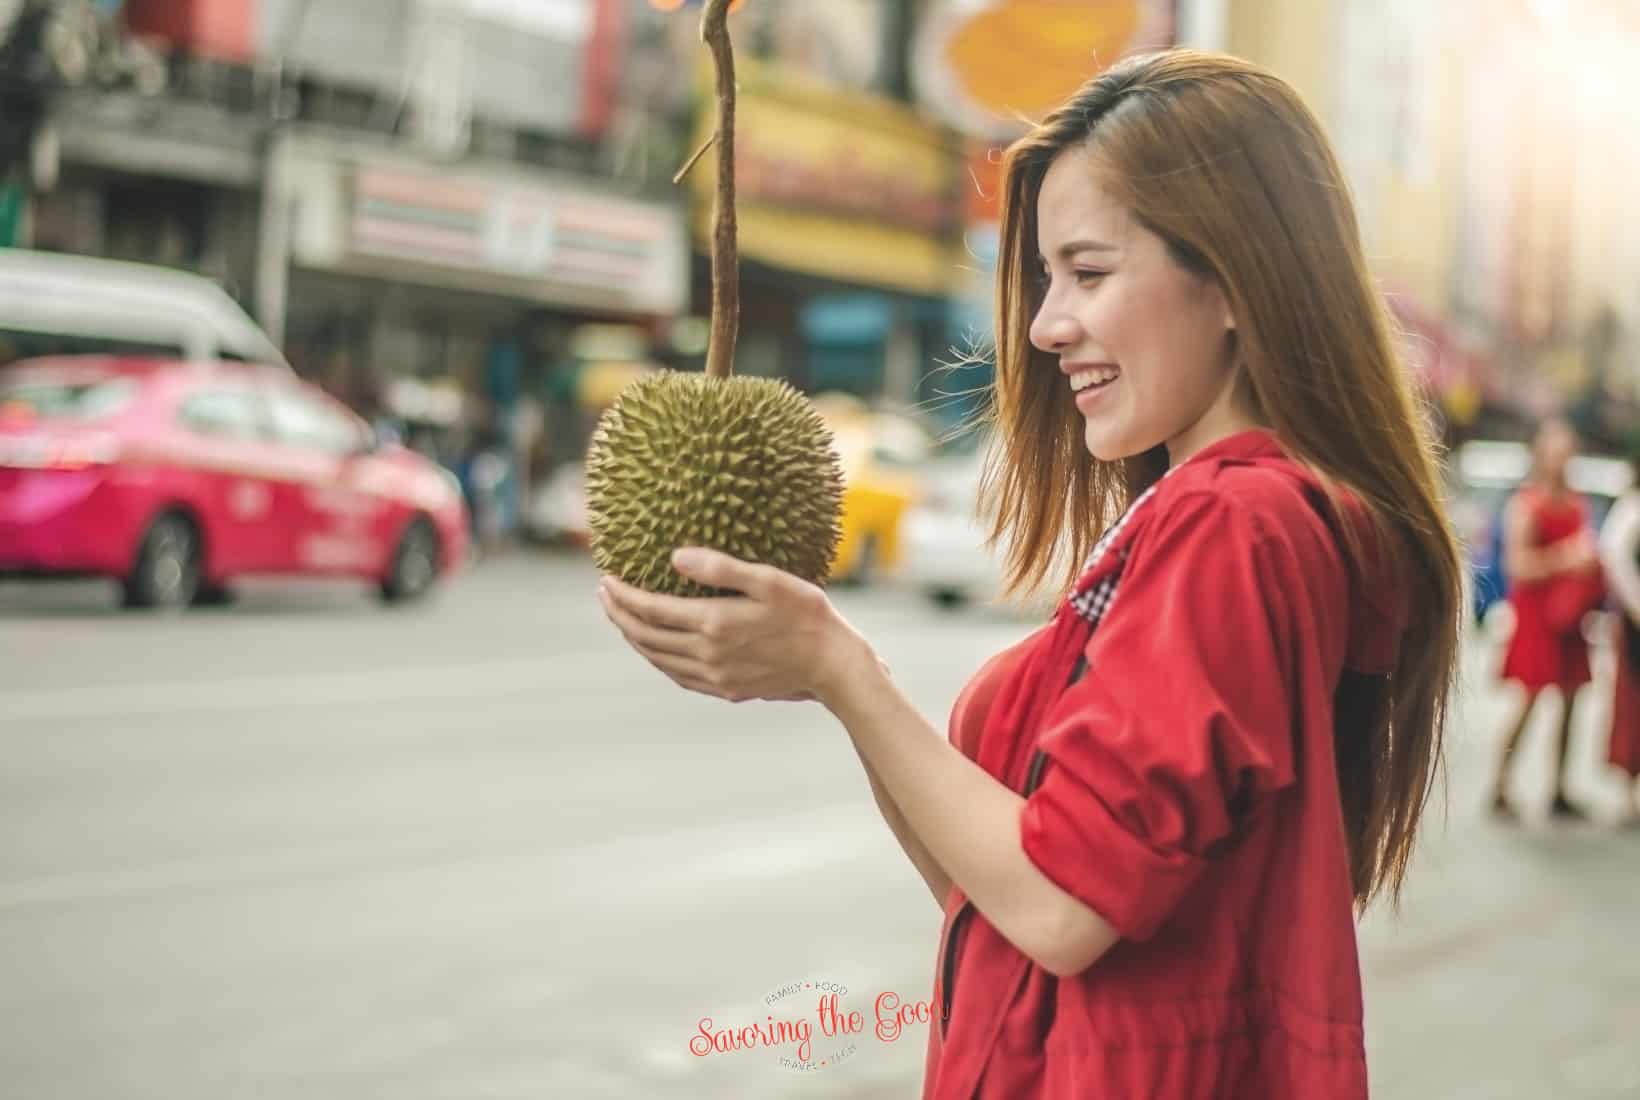 A woman holding a durian fruit on the street.